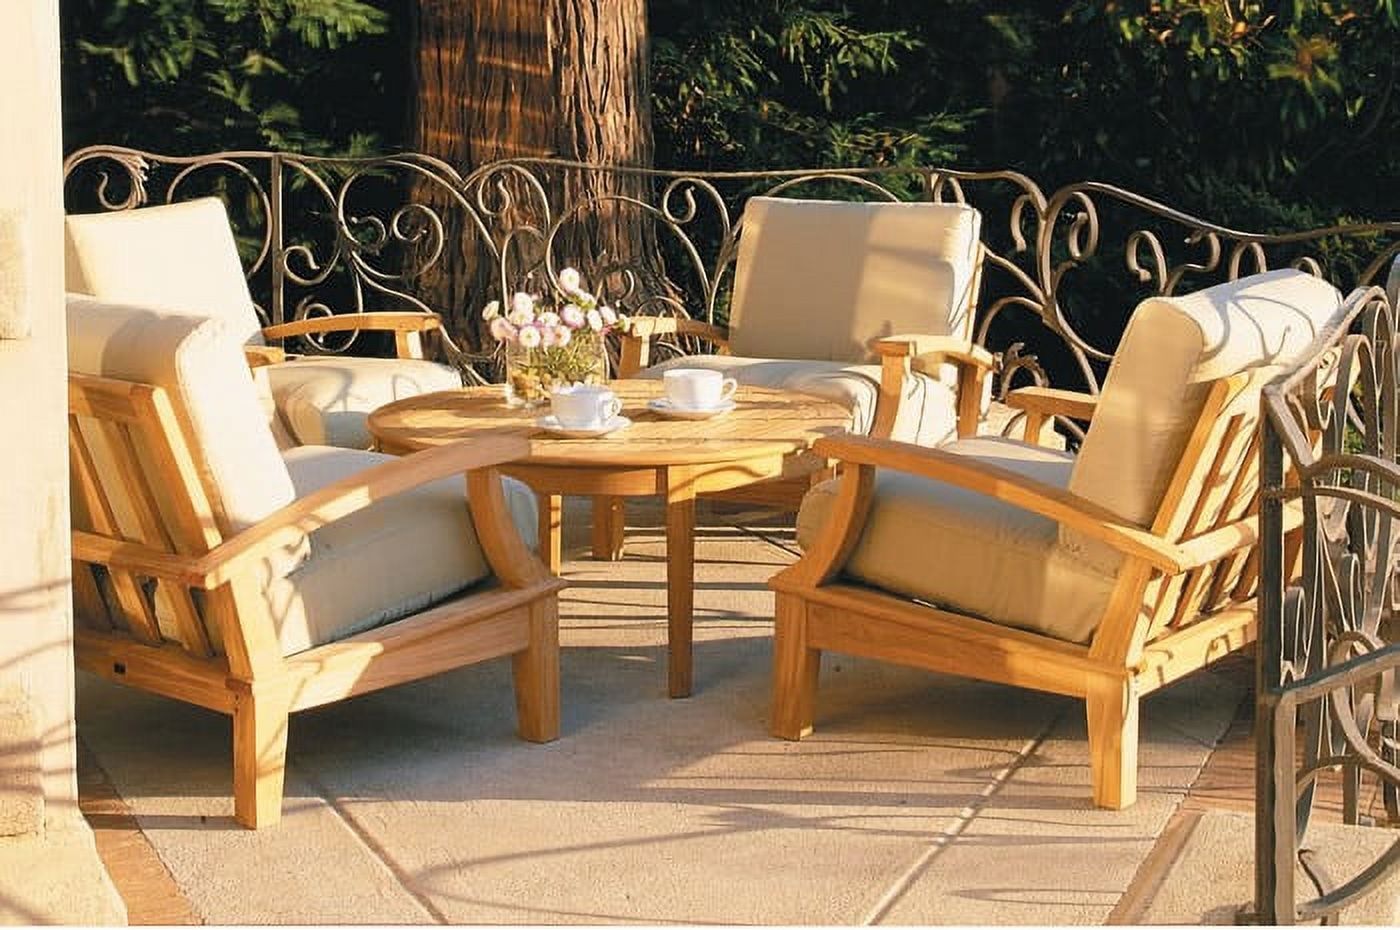 WholesaleTeak Outdoor Patio Grade-A Teak Wood 6 Piece Teak Sofa Set - 3-Seater Sofa, 2 Lounge Chairs, 2 Ottomans and 35" Round Coffee Table -Furniture only --Somer Collection #WMSSSA5 - image 2 of 5